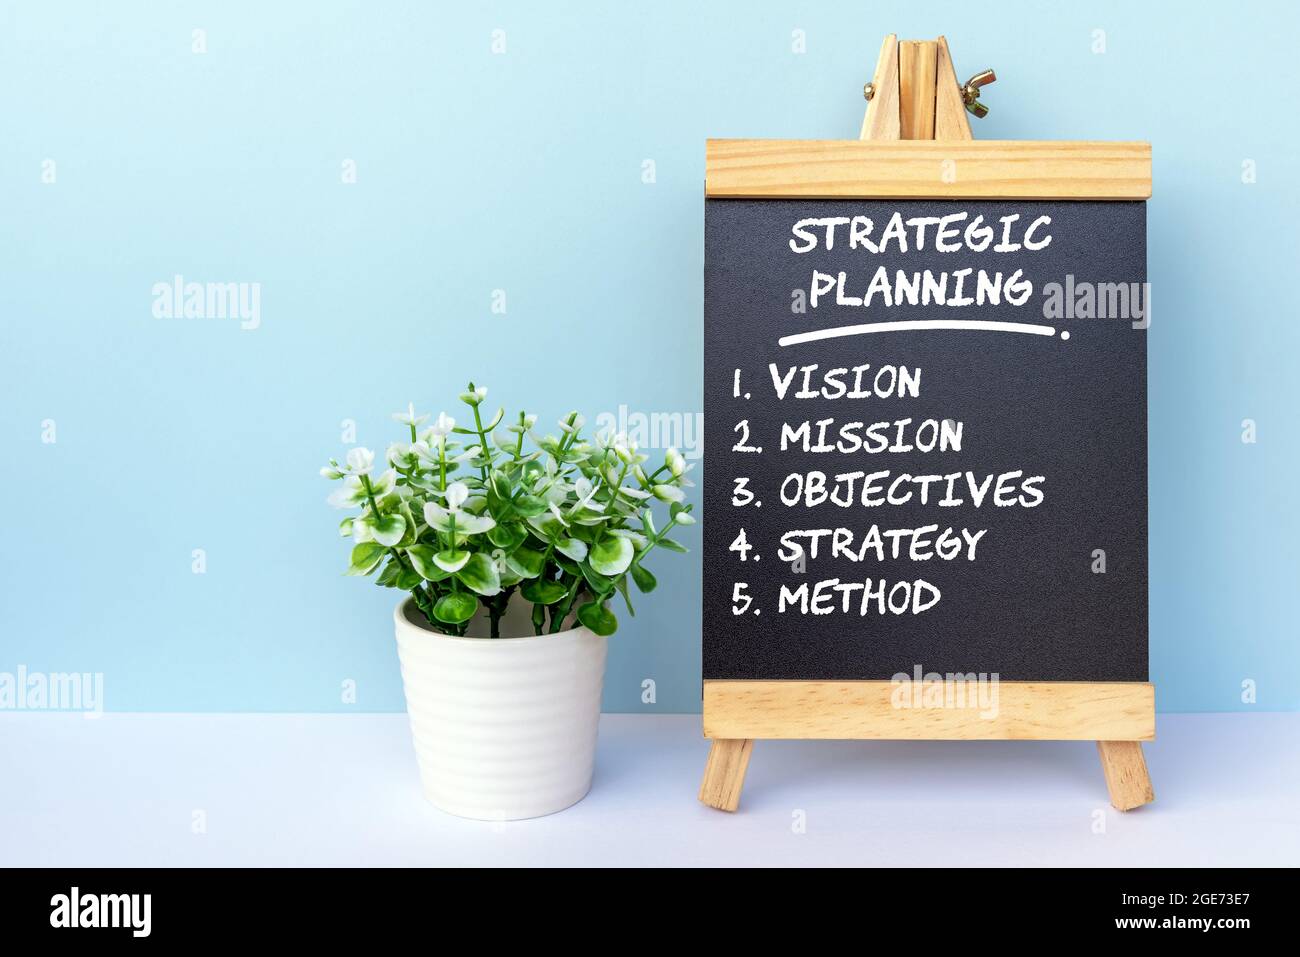 Five step of strategic planning - business concept Stock Photo